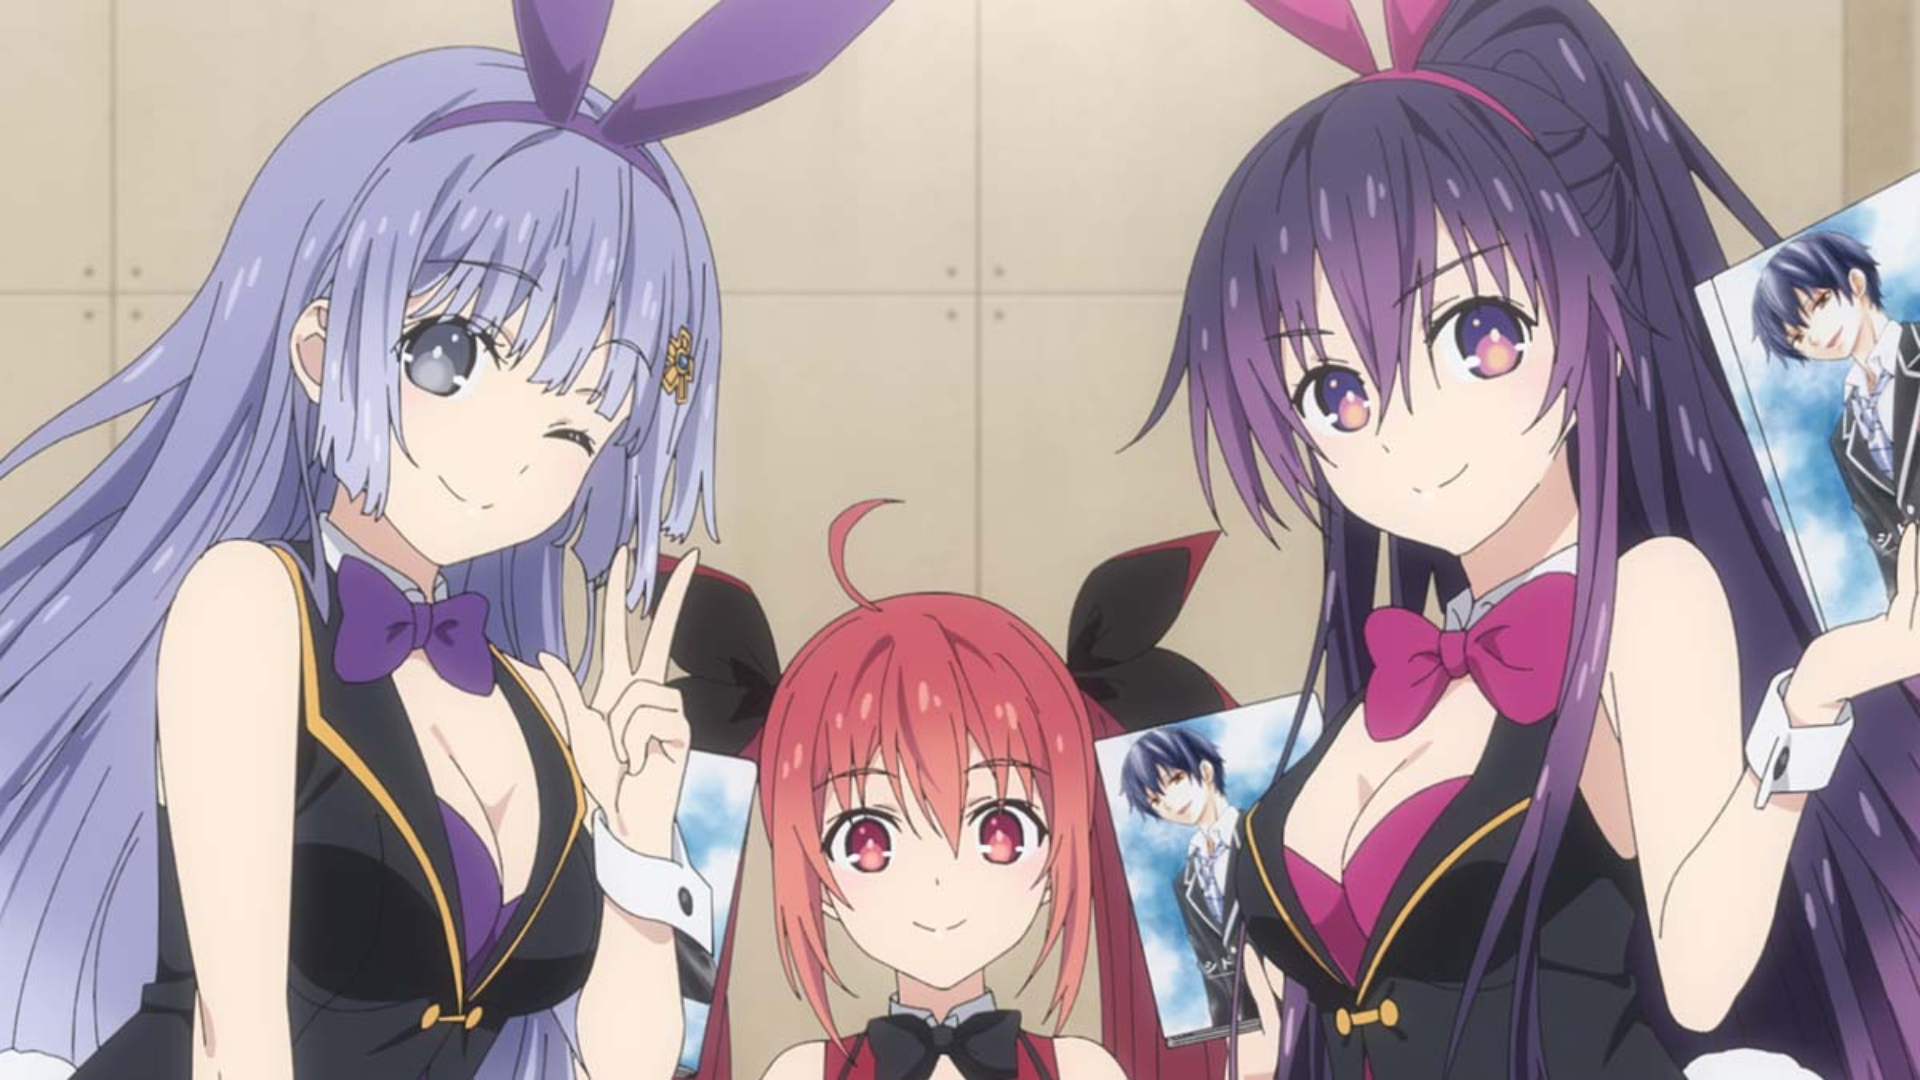 Date a Live IV Opening and Ending Song Creditless Versions Released